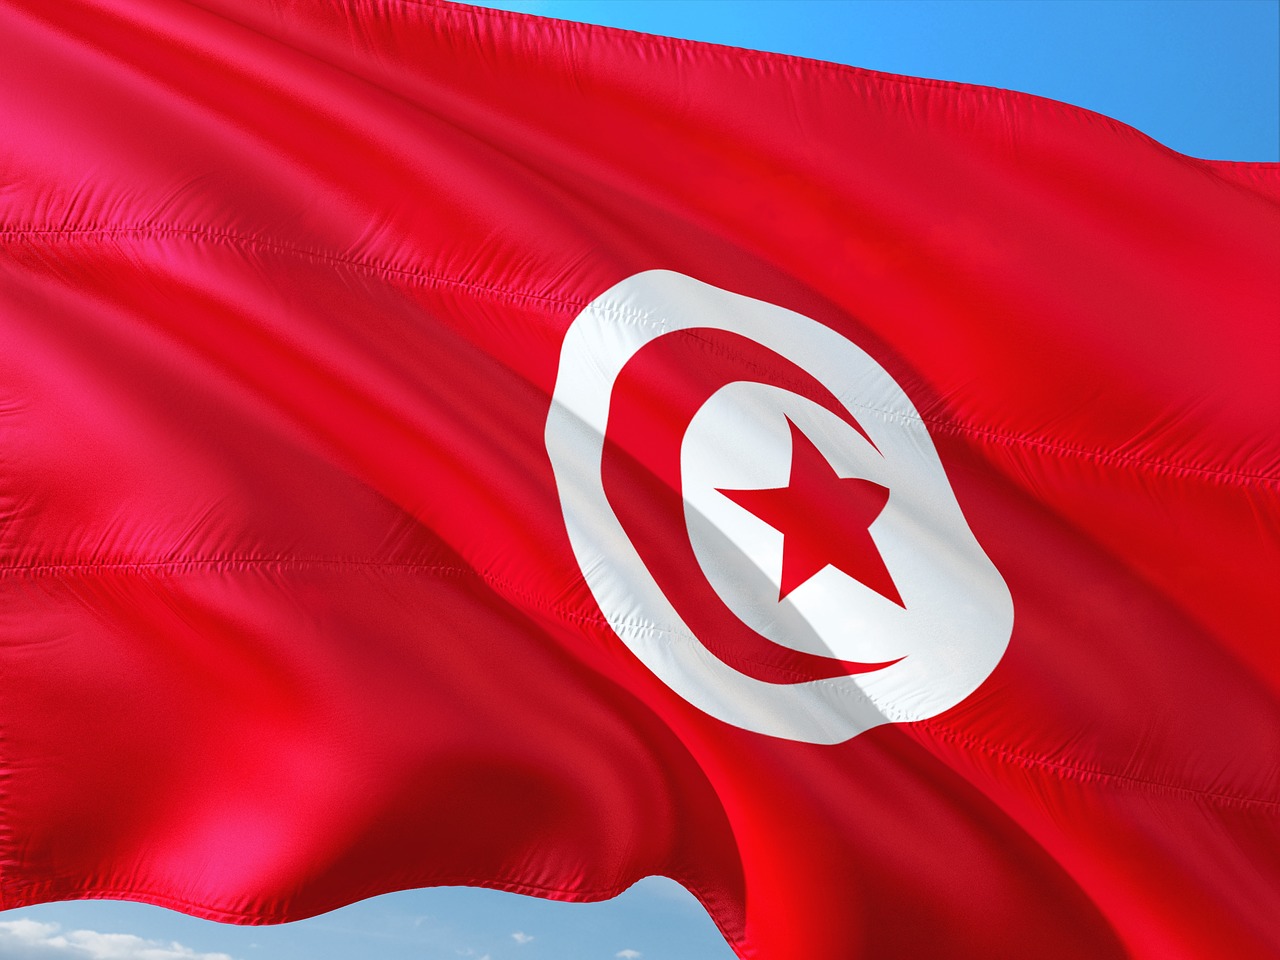 Tunisia authorities place opposition leader under house arrest